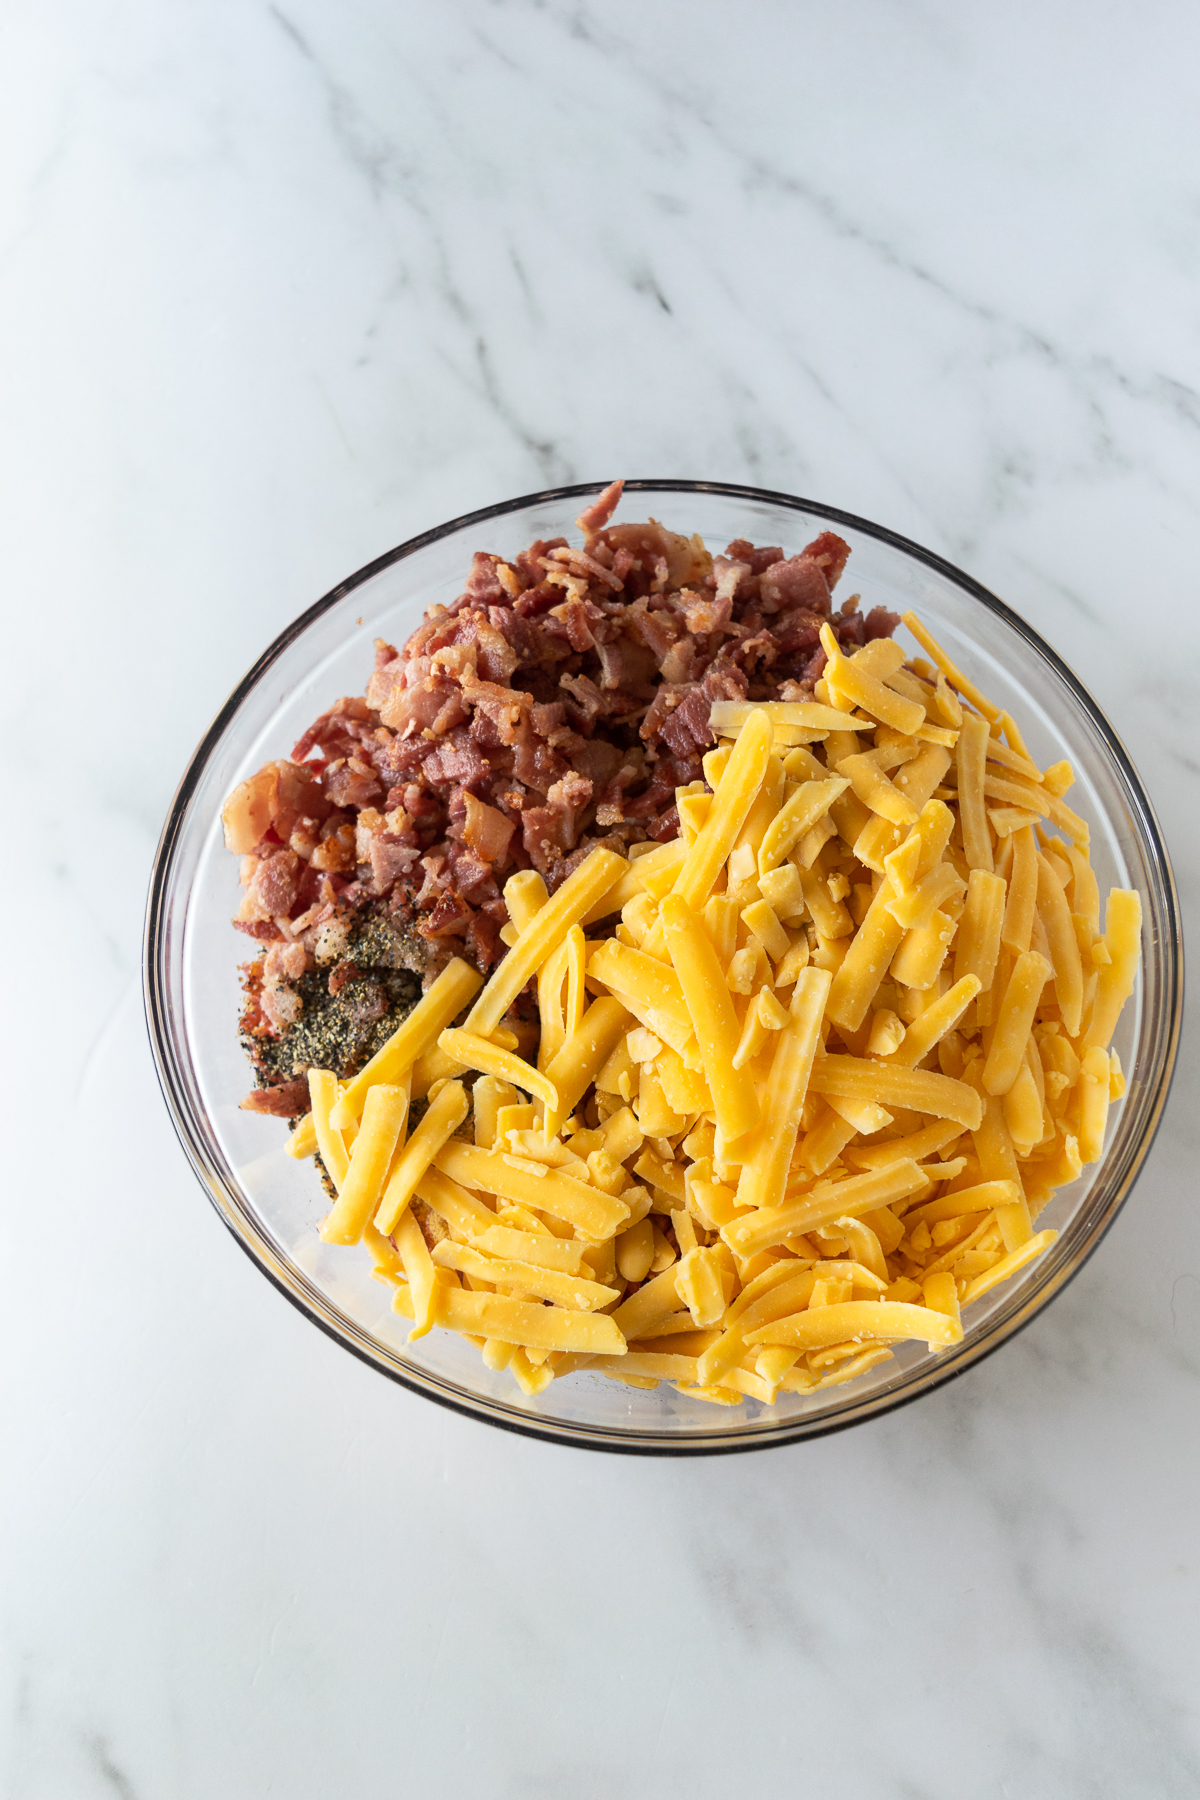 ground beef mixture with bacon and cheese for burgers.